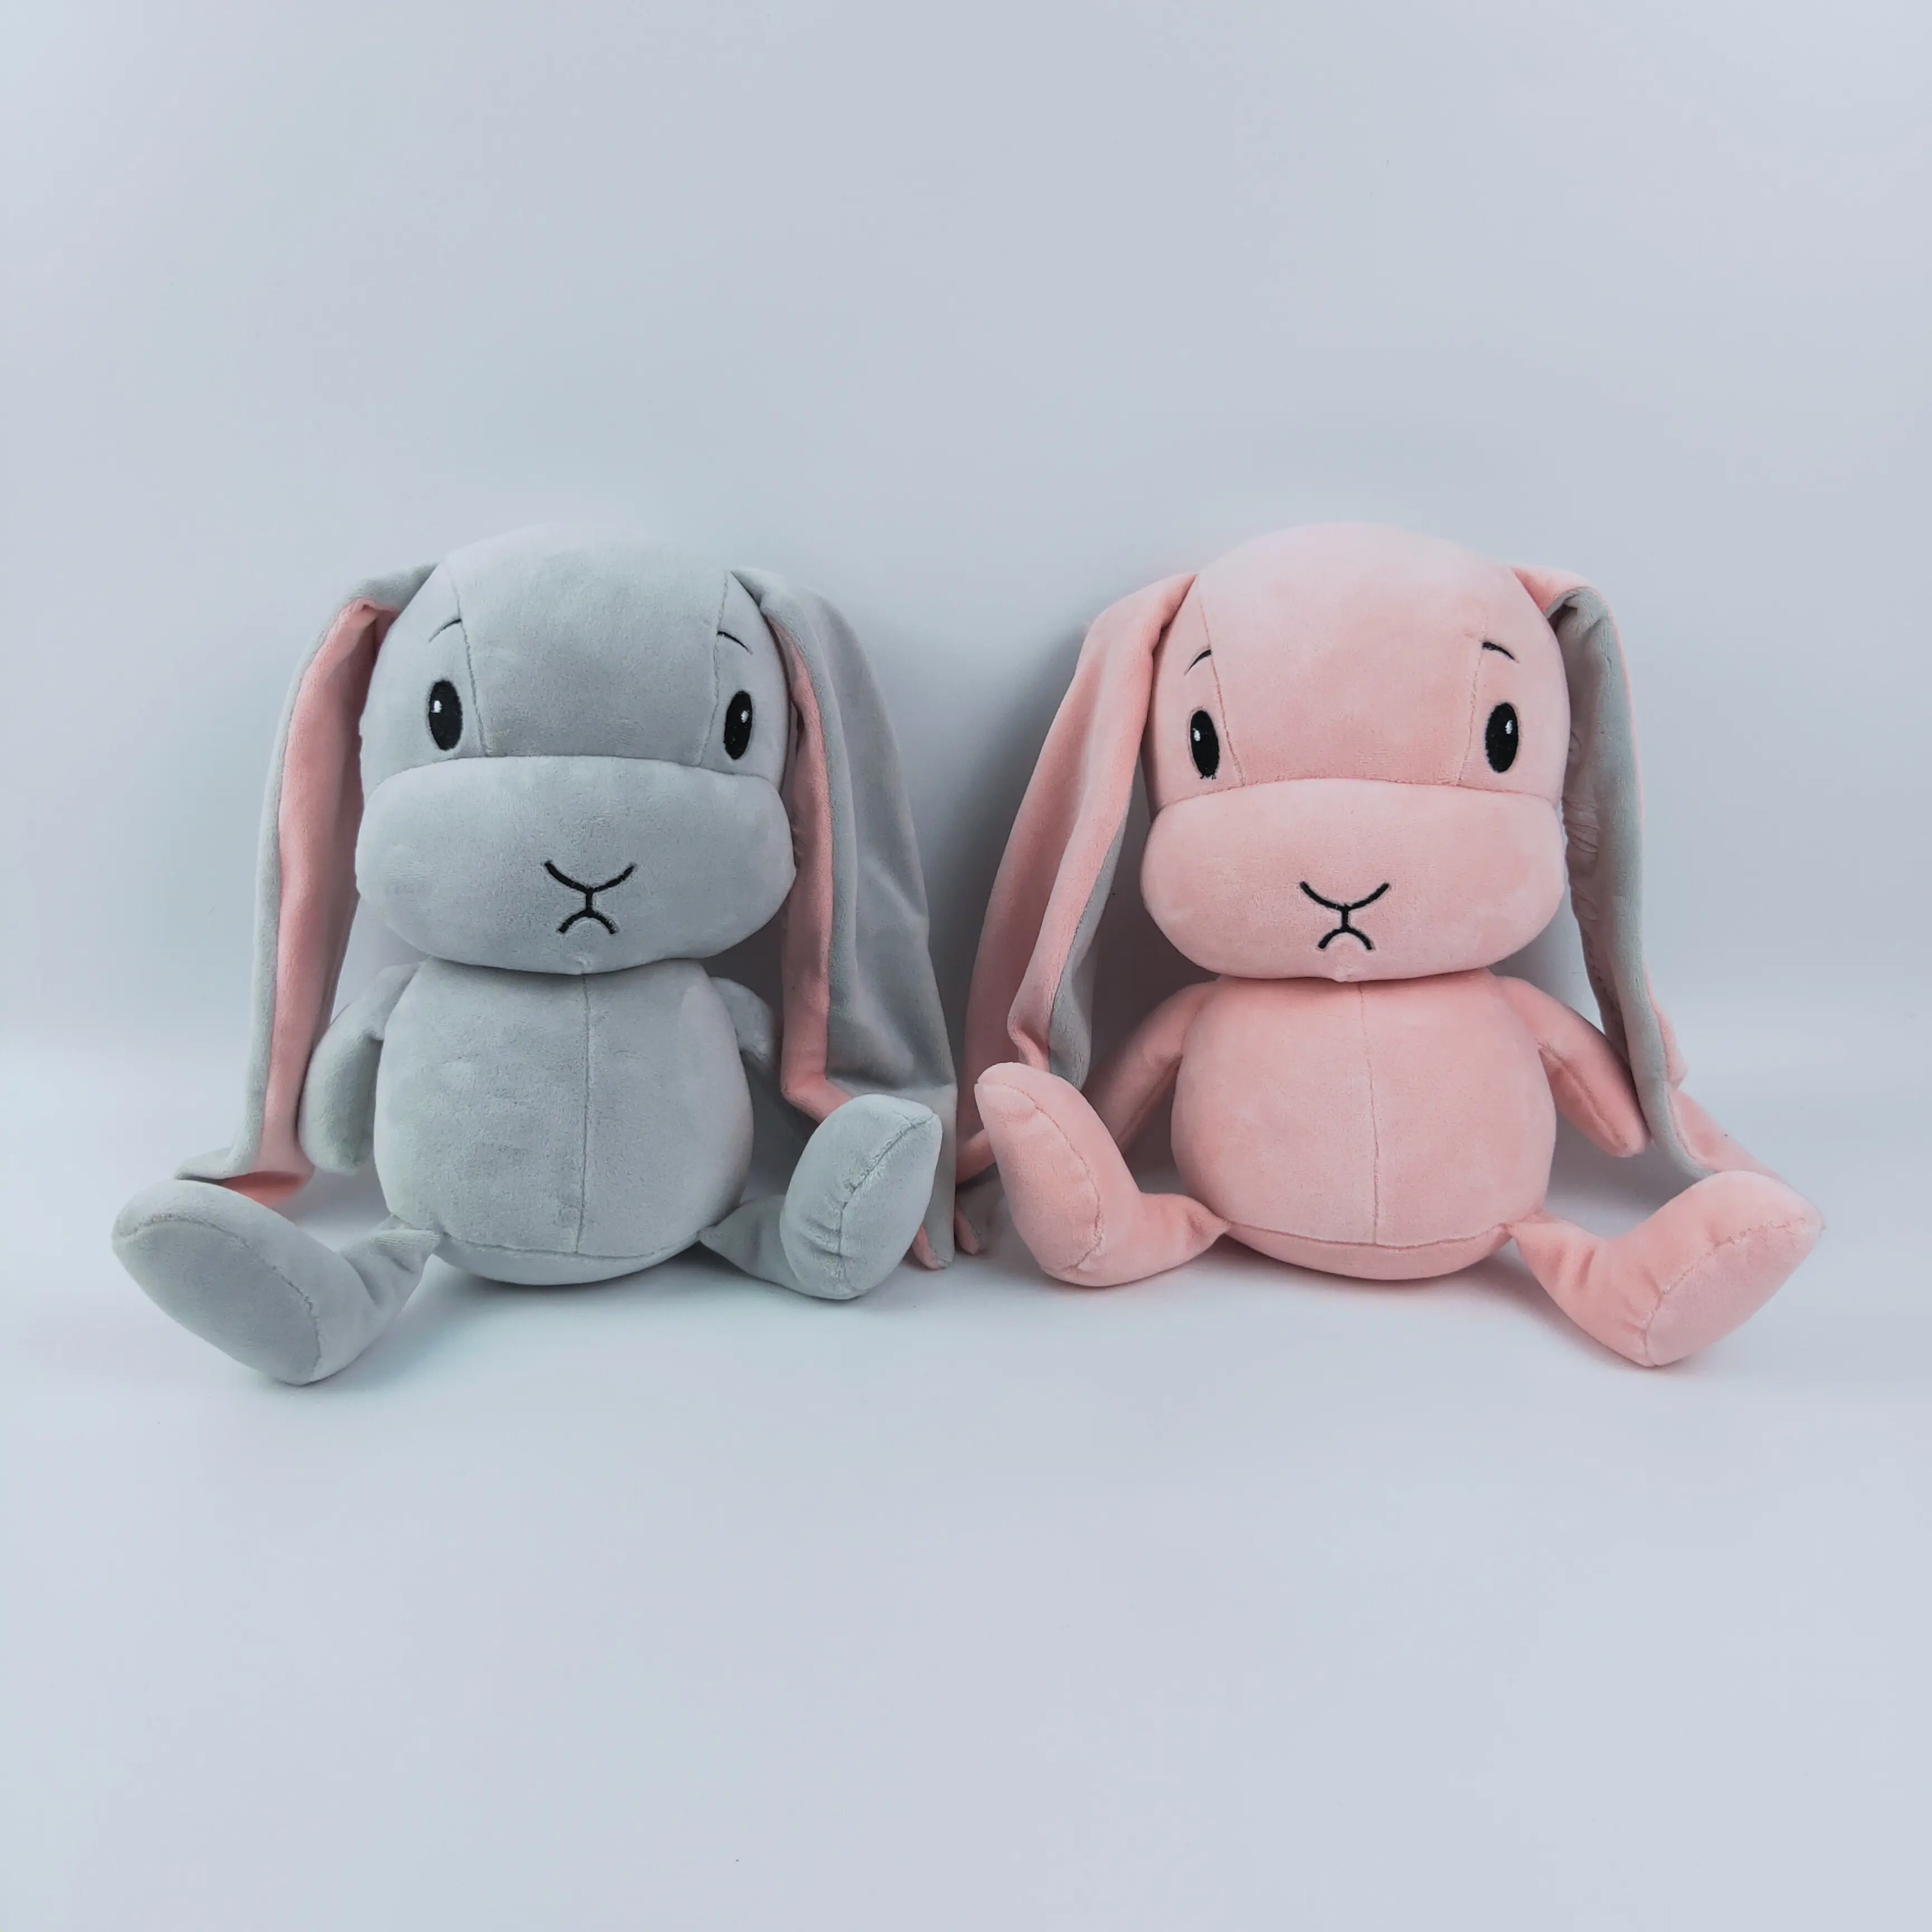 Super soft spandex plush bunny with long ears with soft cotton inside